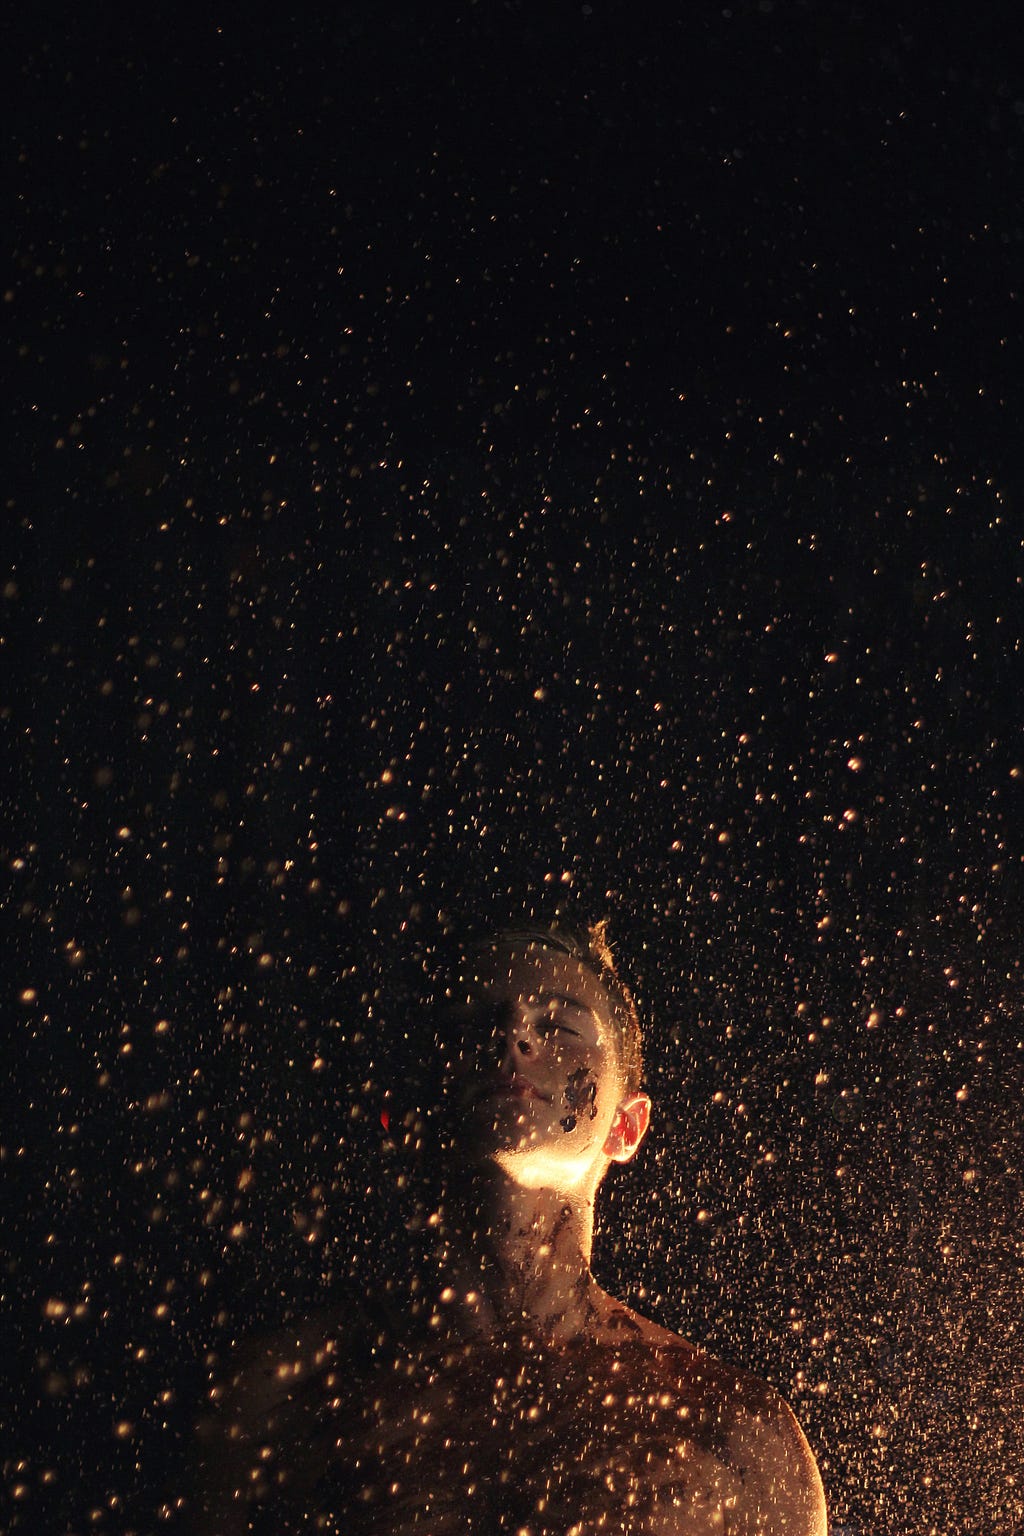 A person standing in front of a black background with gold flecks falling around them.